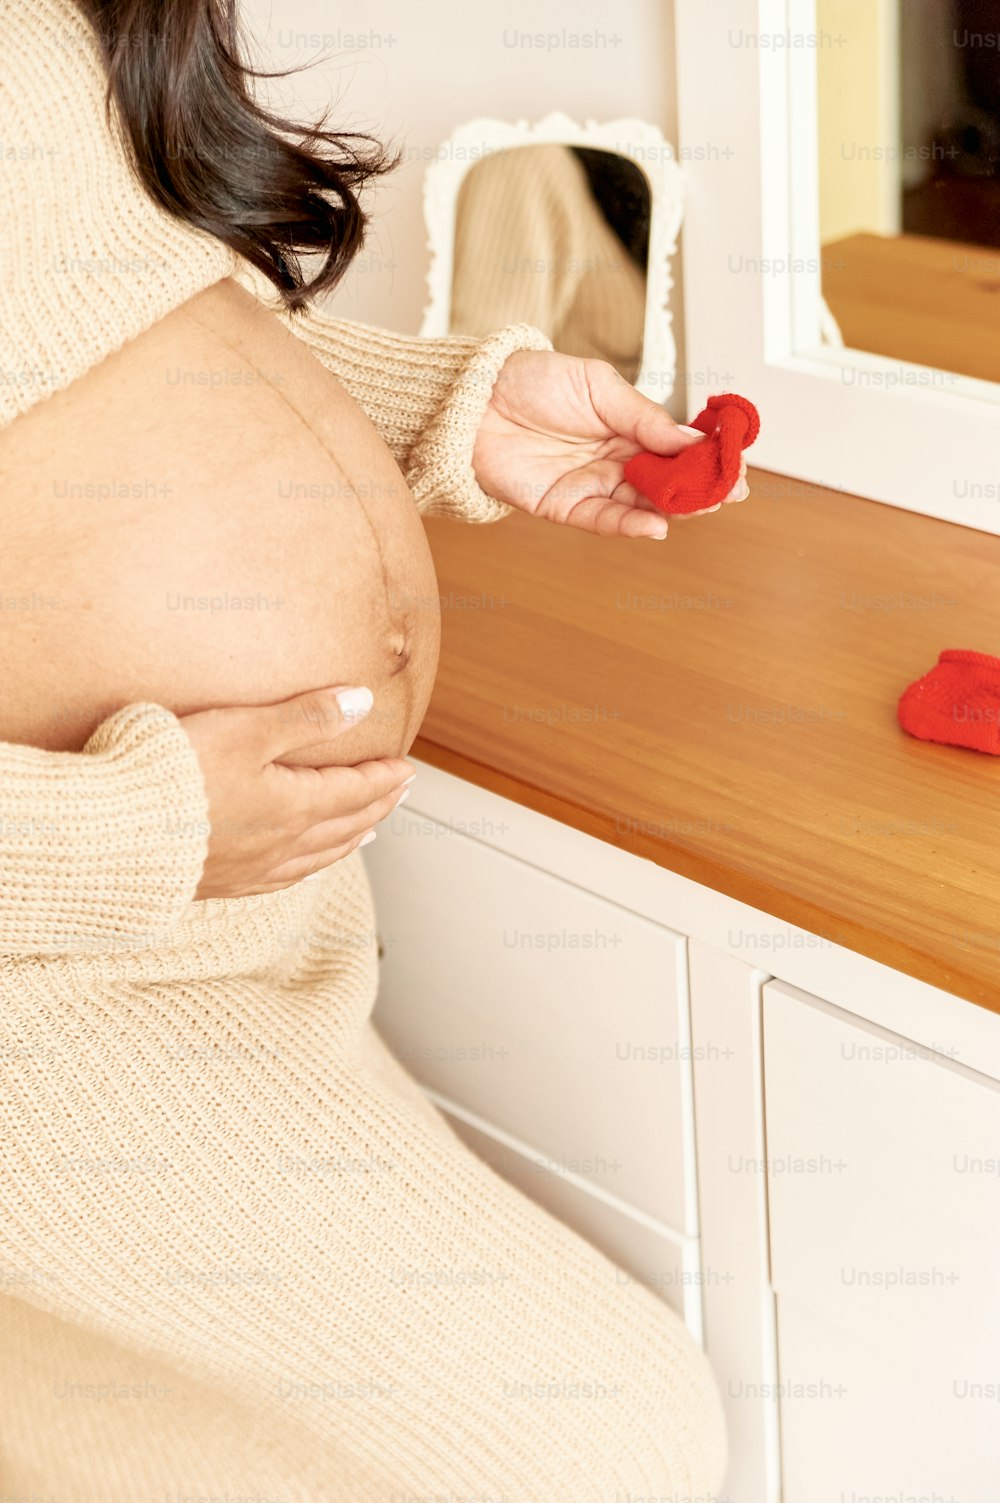 a pregnant woman holding a red object in her hand